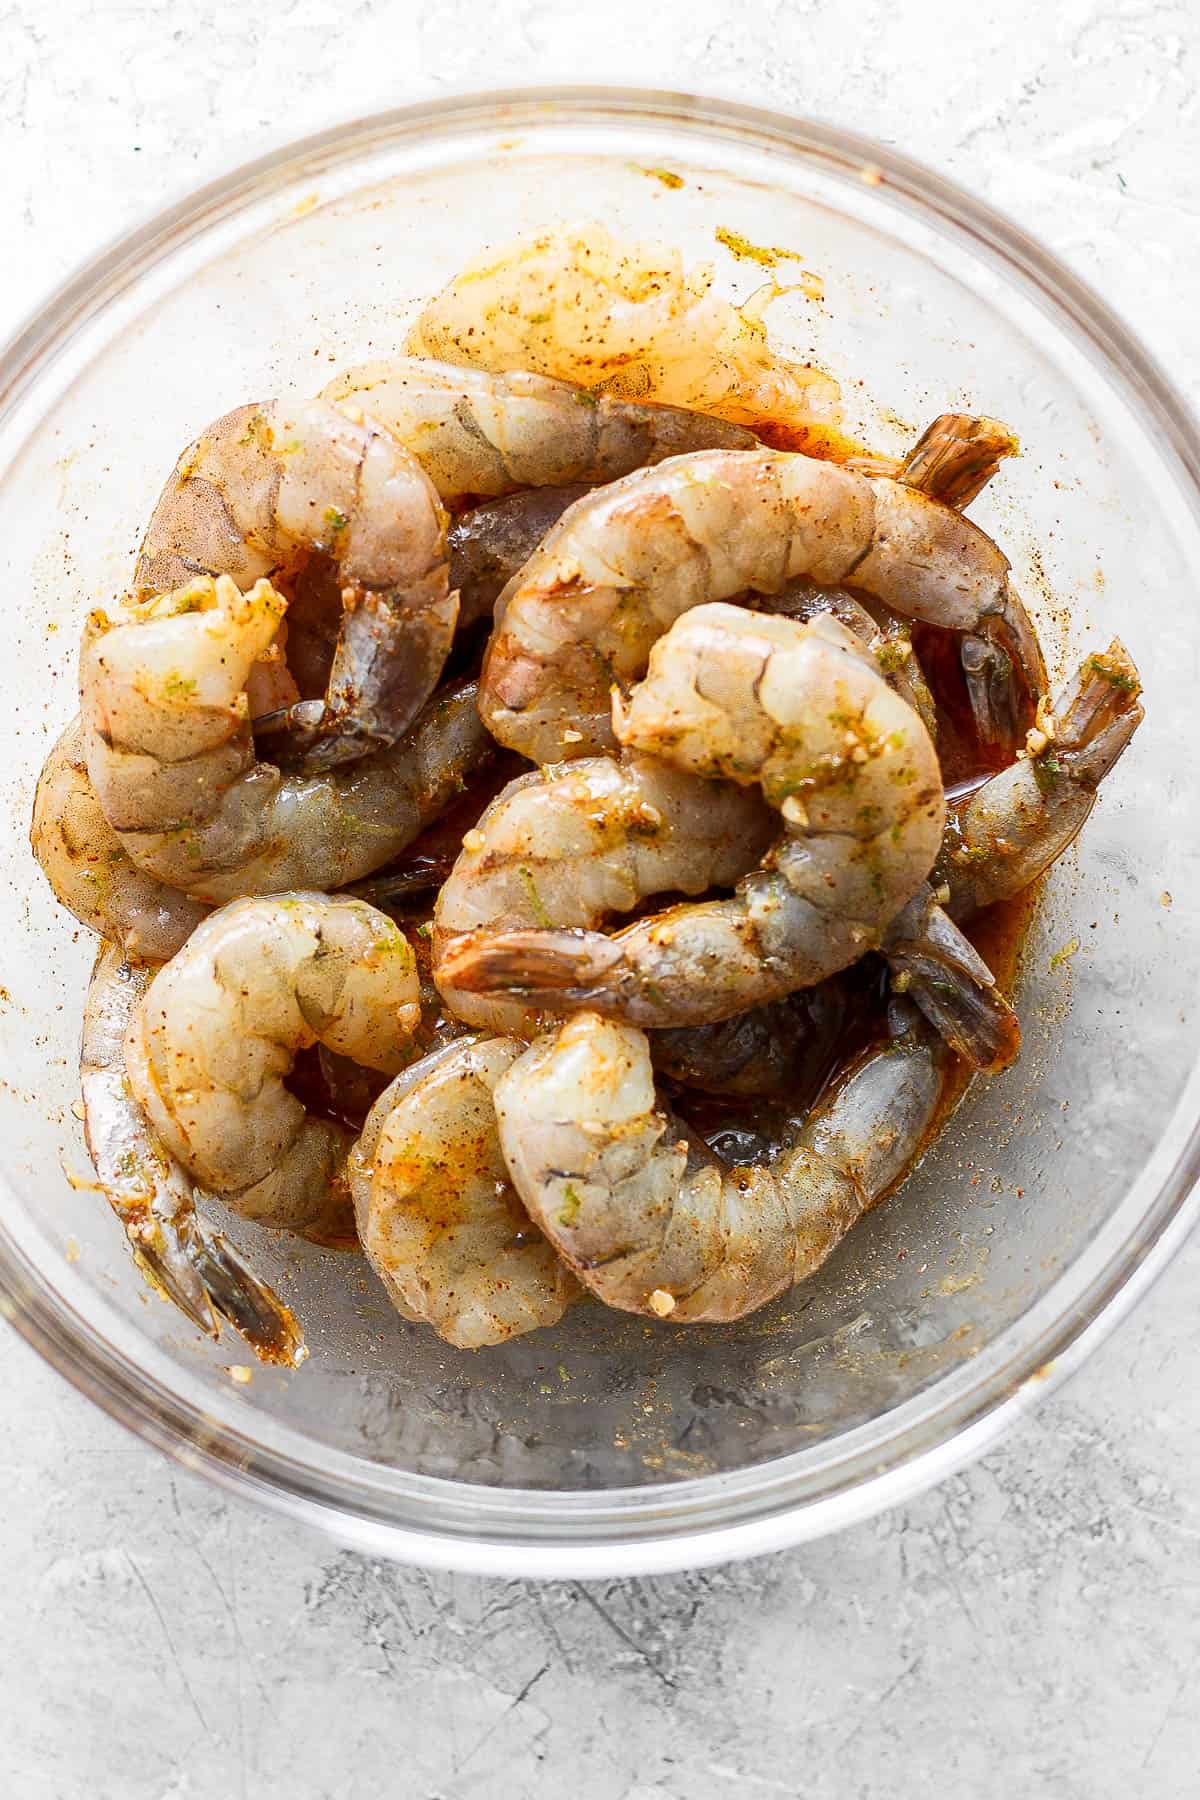 Chili lime marinating shrimp in a large glass bowl.